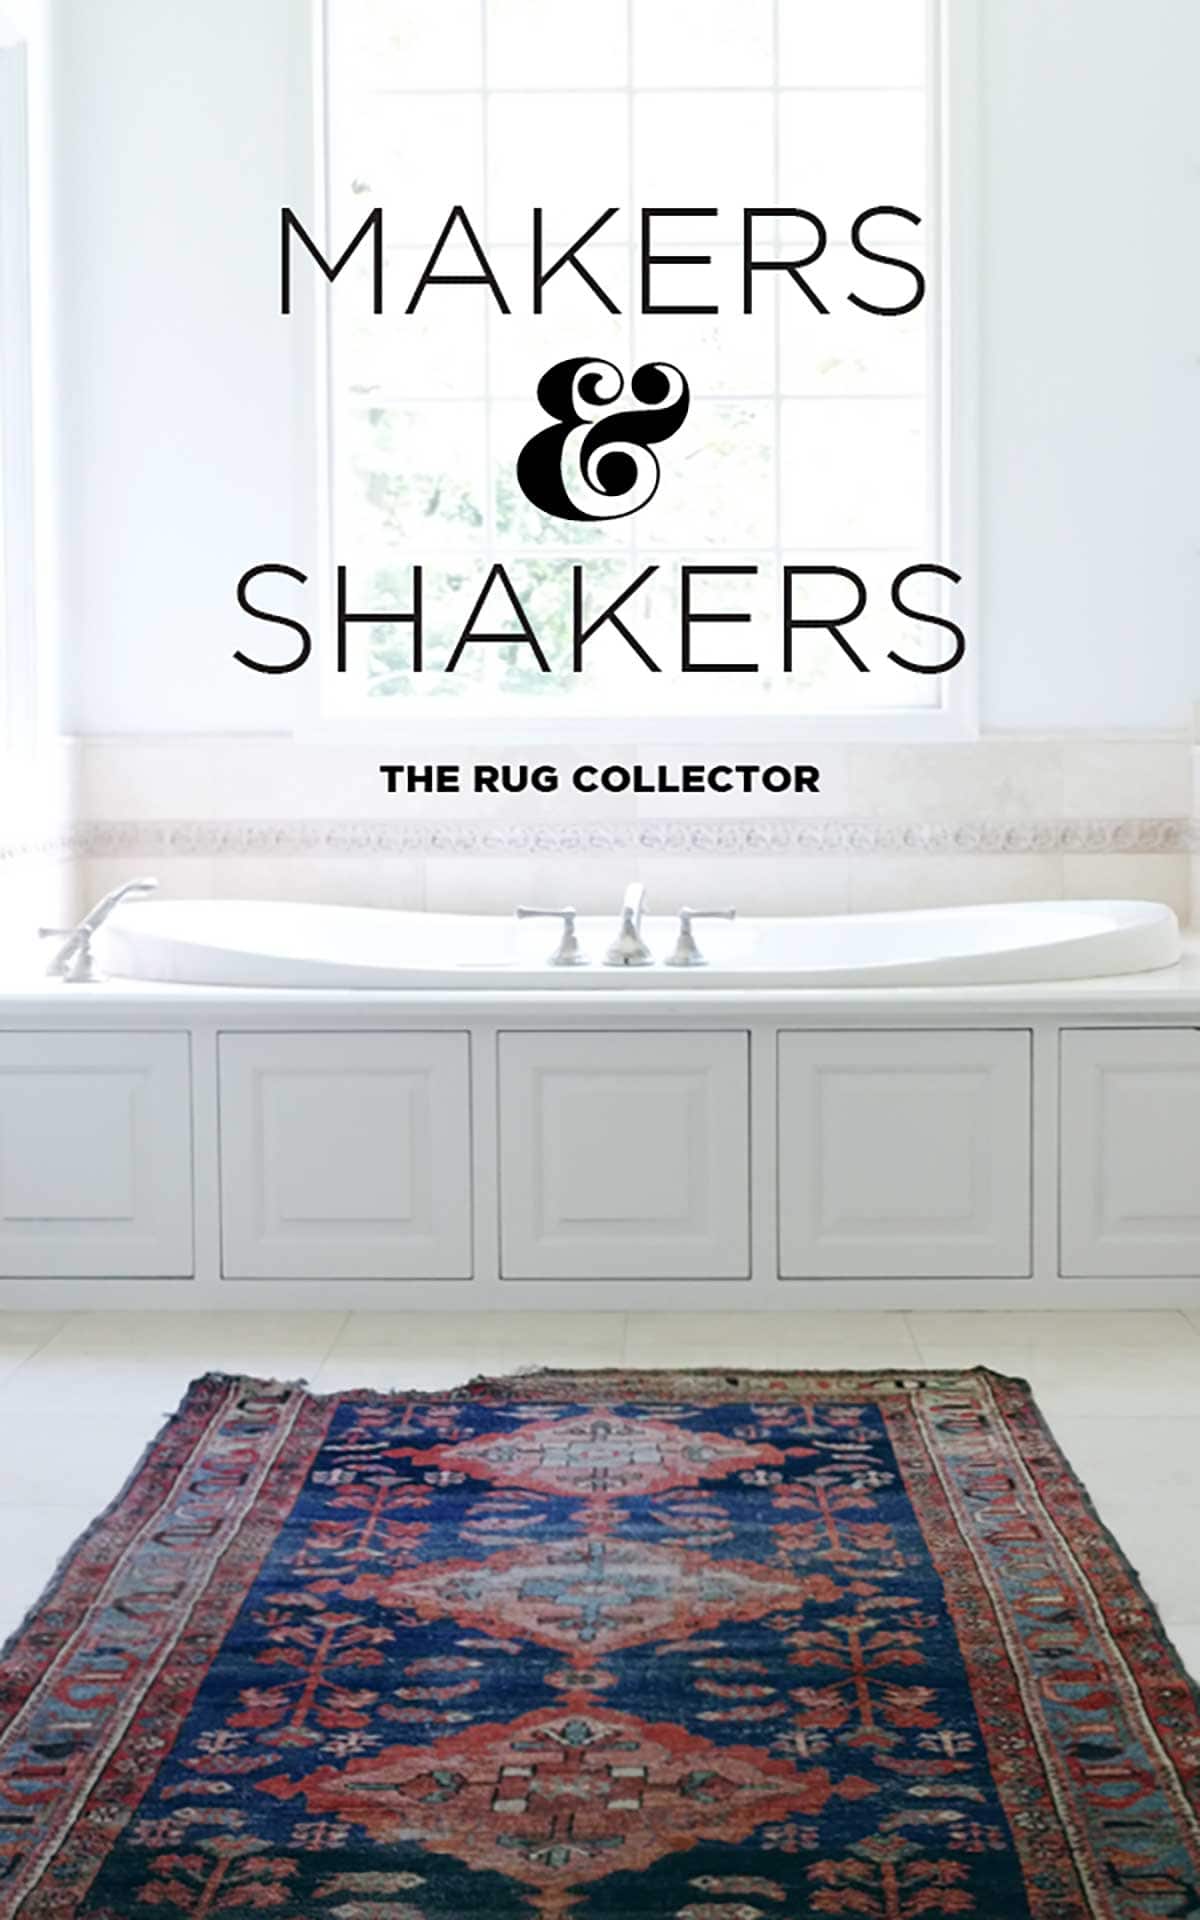 Meet Woven Abode -and interview with rug collector Kim Gunter